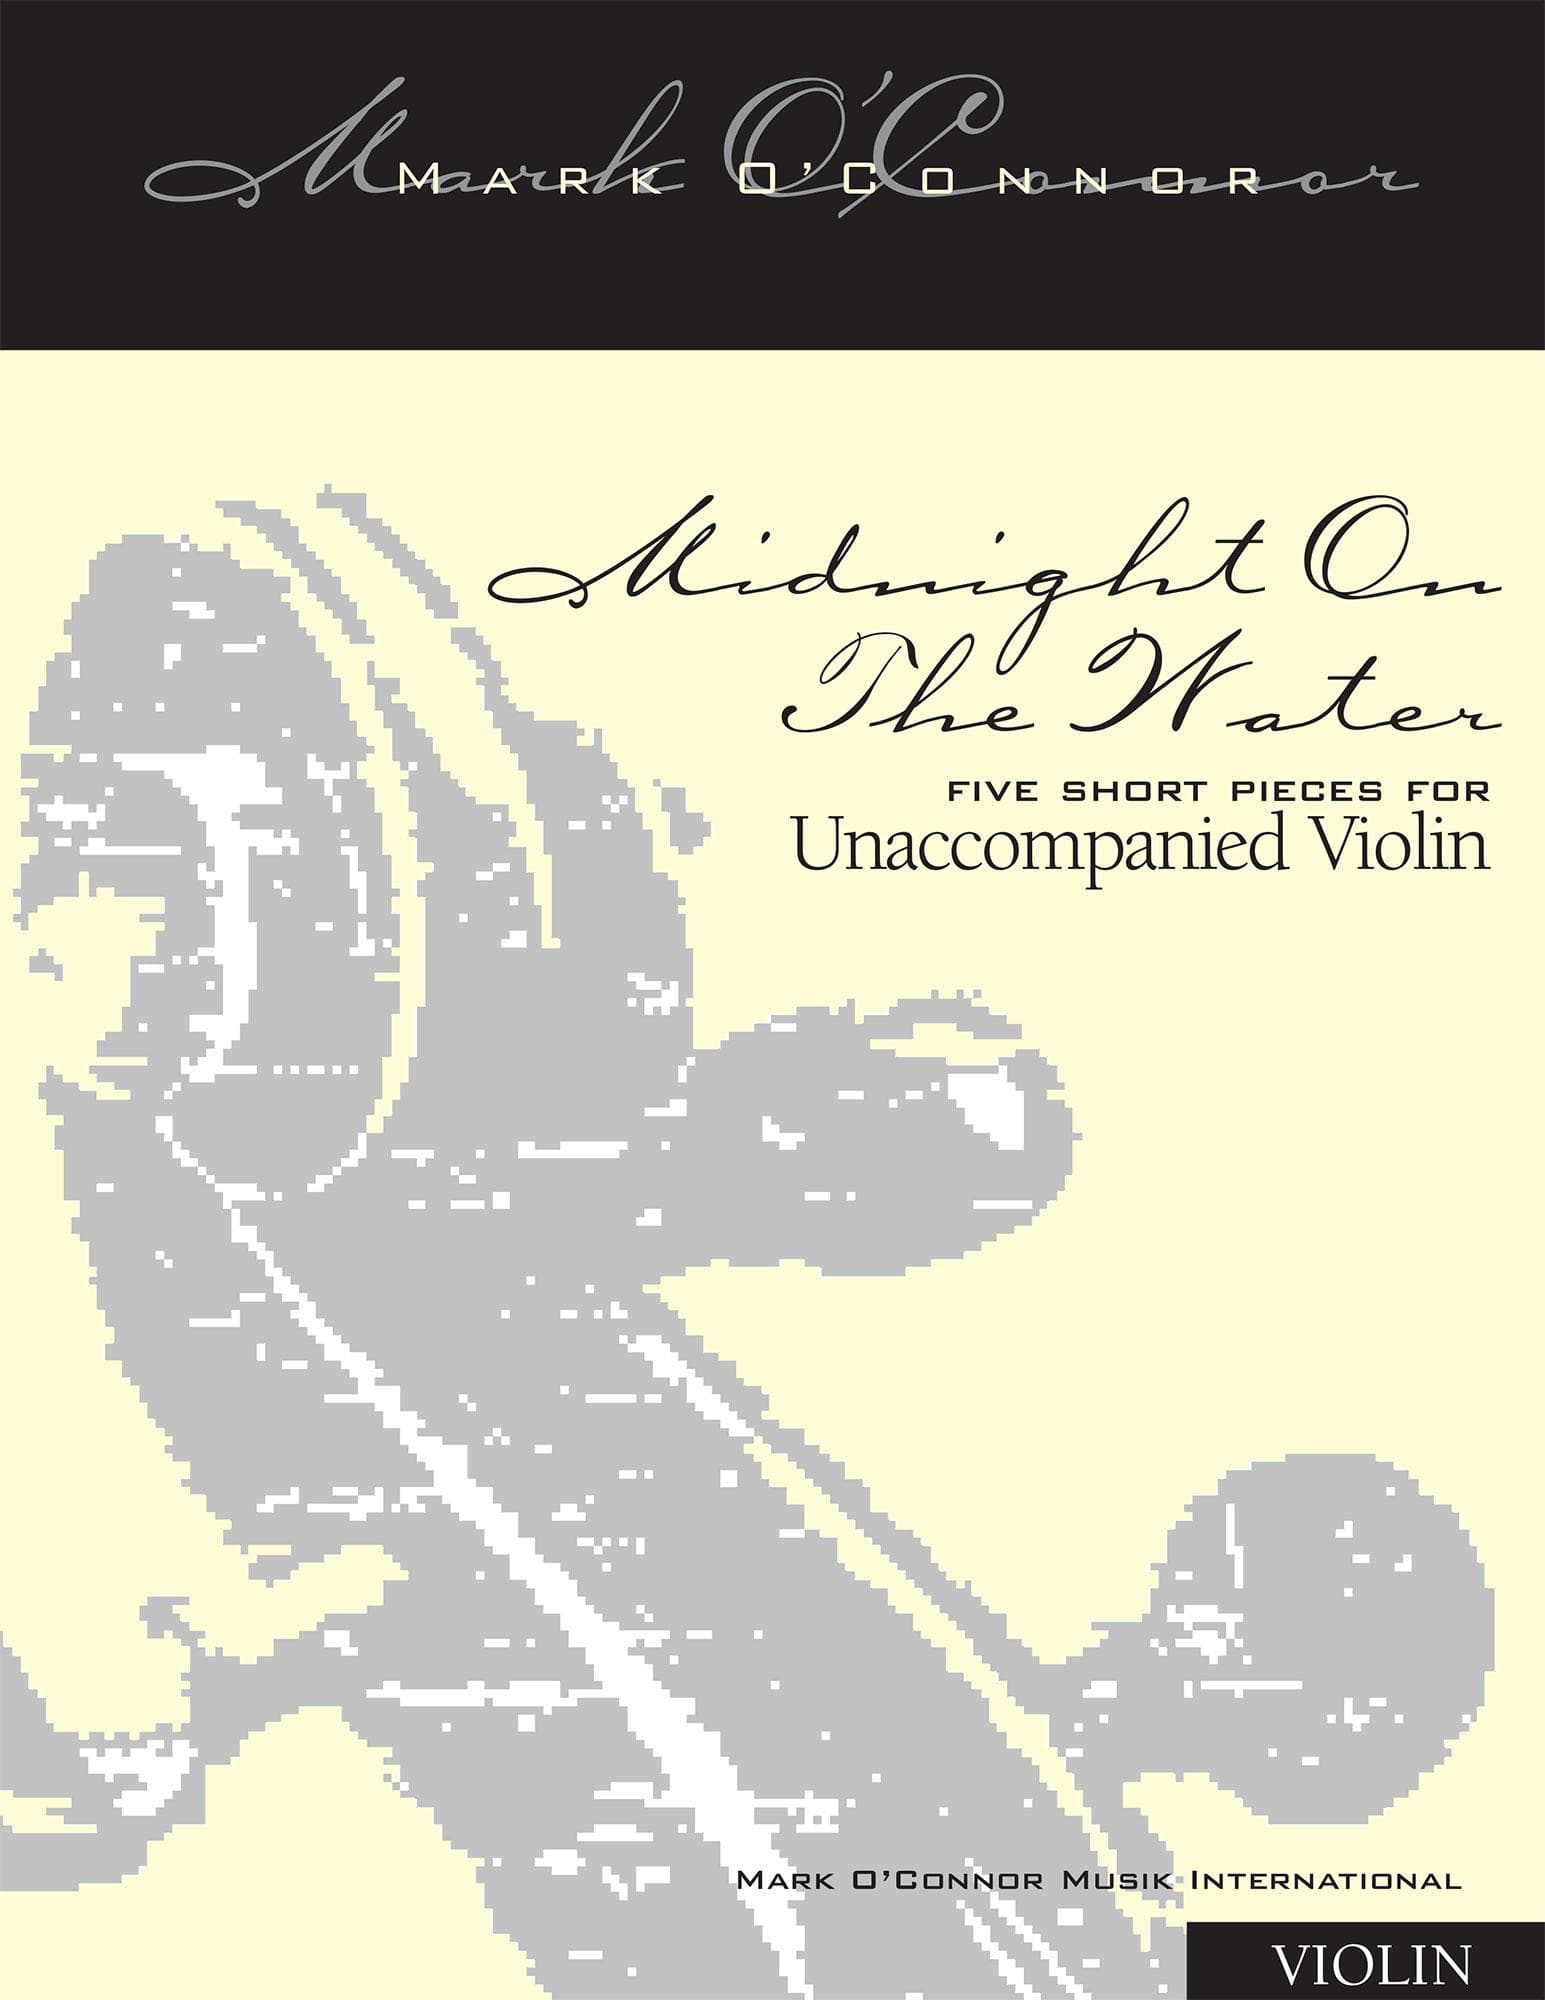 O'Connor, Mark - Midnight On The Water for Unaccompanied Violin - Digital Download